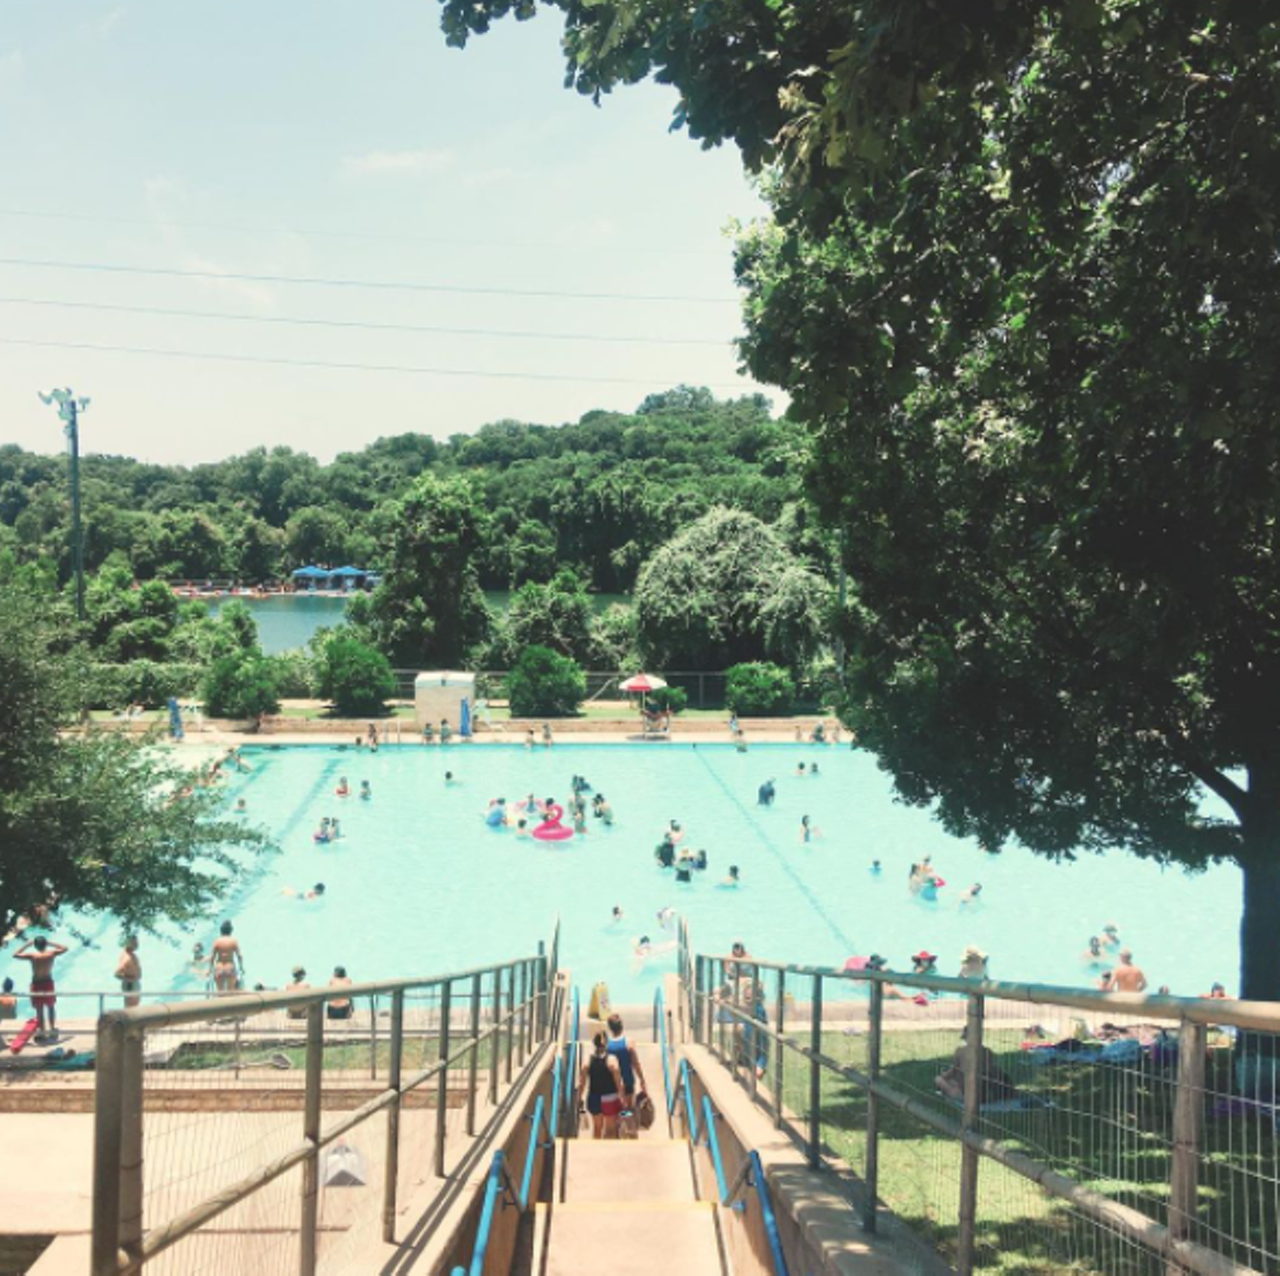 Deep Eddy
401 Deep Eddy Ave, Austin, (512) 472-8546, austintexas.gov
Tucked away near downtown Austin, Deep Eddy is the oldest swimming pool in Texas. Capacity is limited, so get there early to beat the crowds.
Photo via Instagram / cameracait